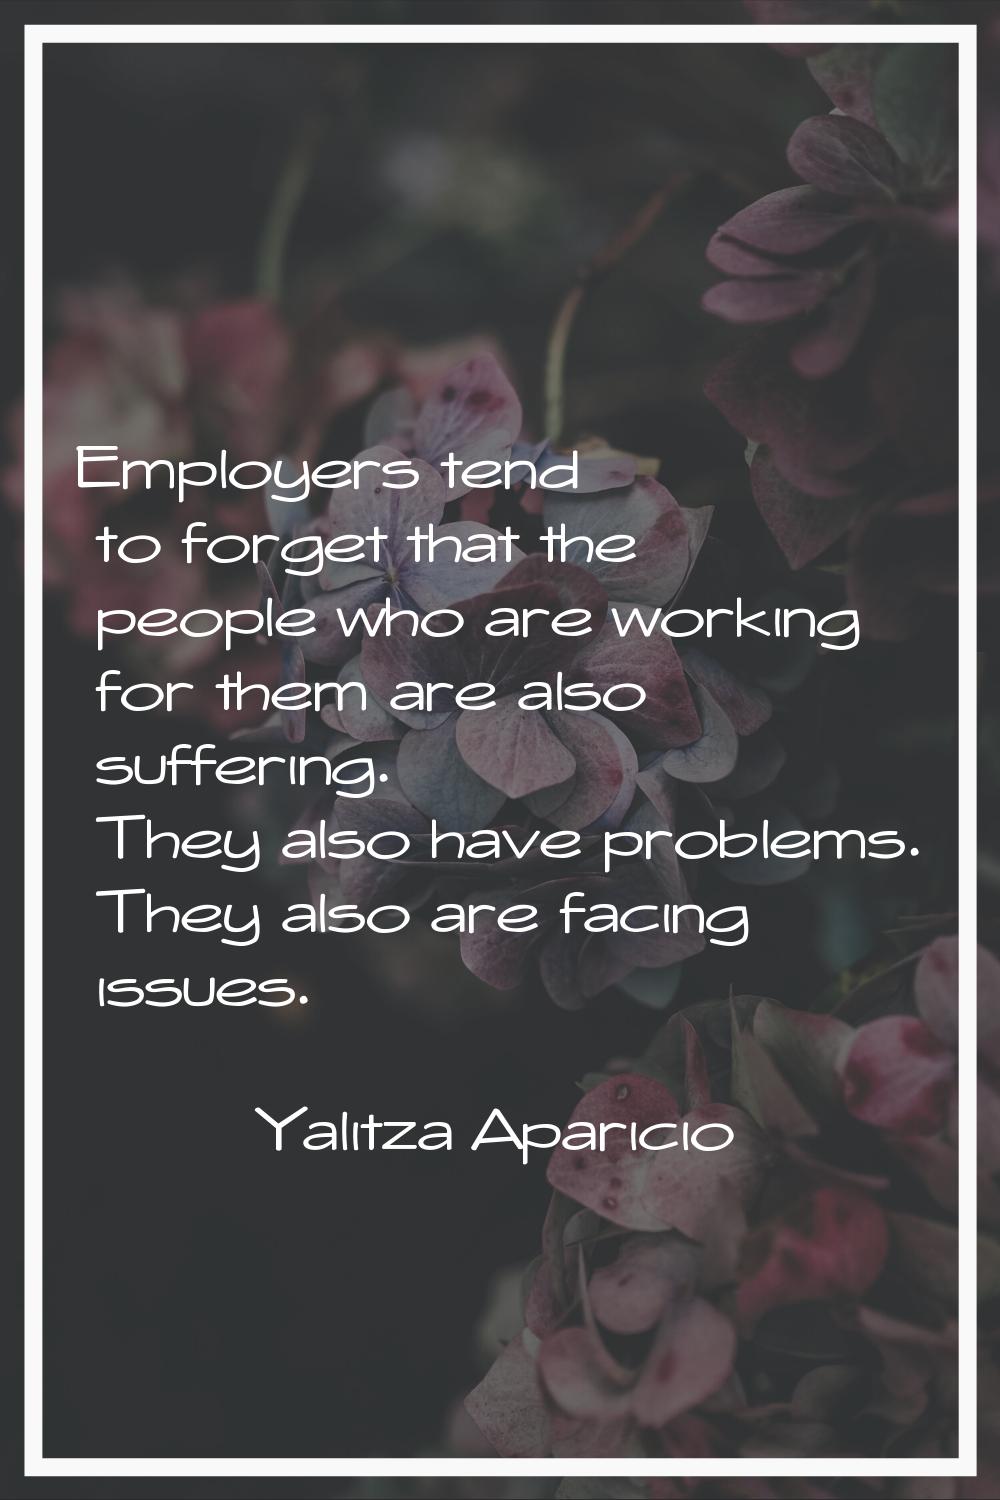 Employers tend to forget that the people who are working for them are also suffering. They also hav